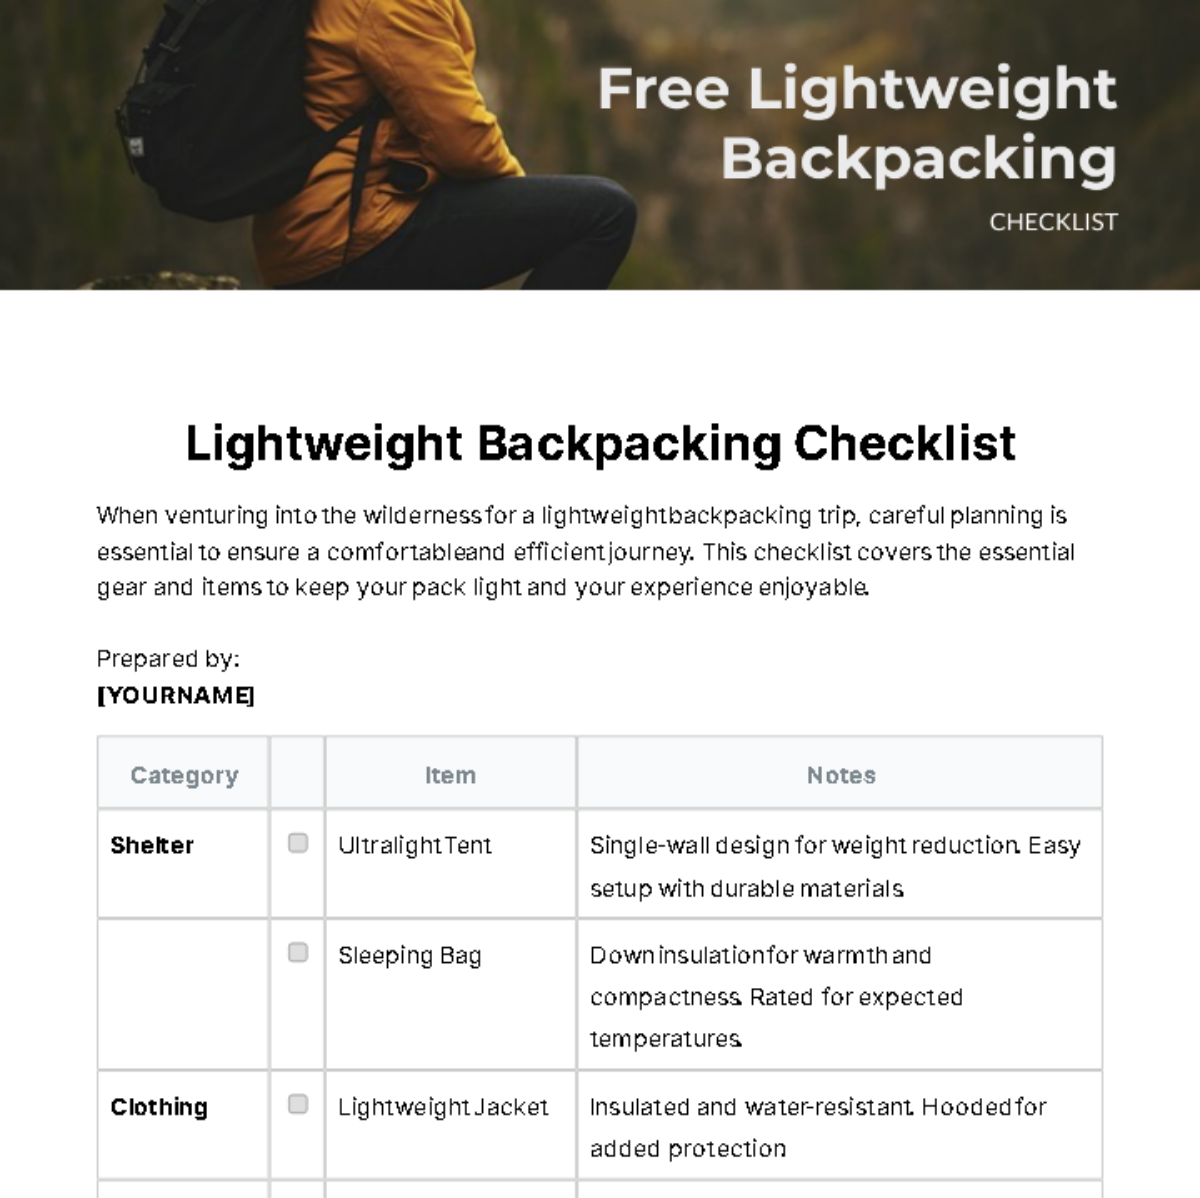 Free Lightweight Backpacking Checklist Template